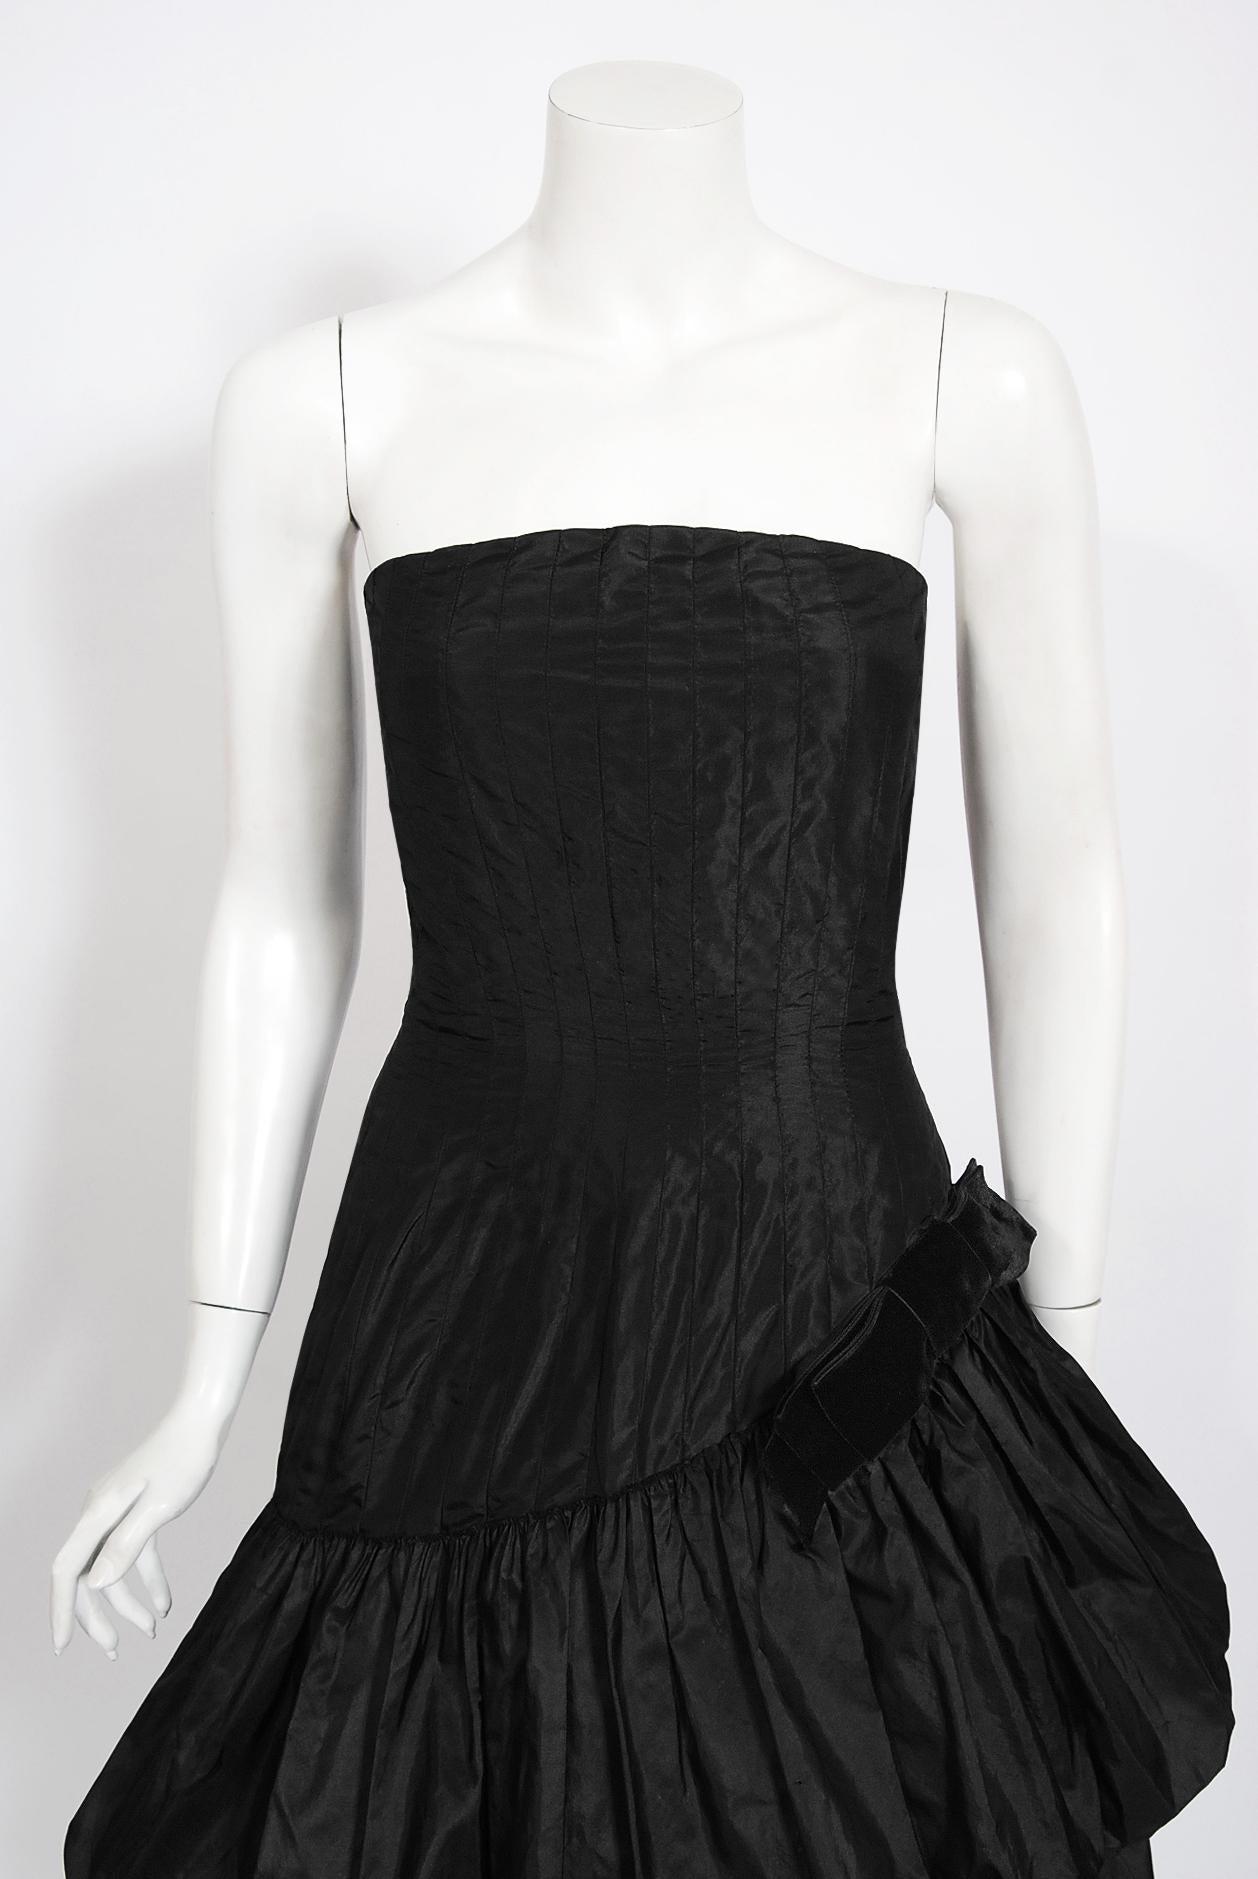 Stunning and highly seductive Old England of Bruxelles custom-made couture cocktail dress dating back to 1959. The client's name label, Mrs. Paliser, is still attached and the amazing construction looks to resemble a famous Yves Saint Laurent for